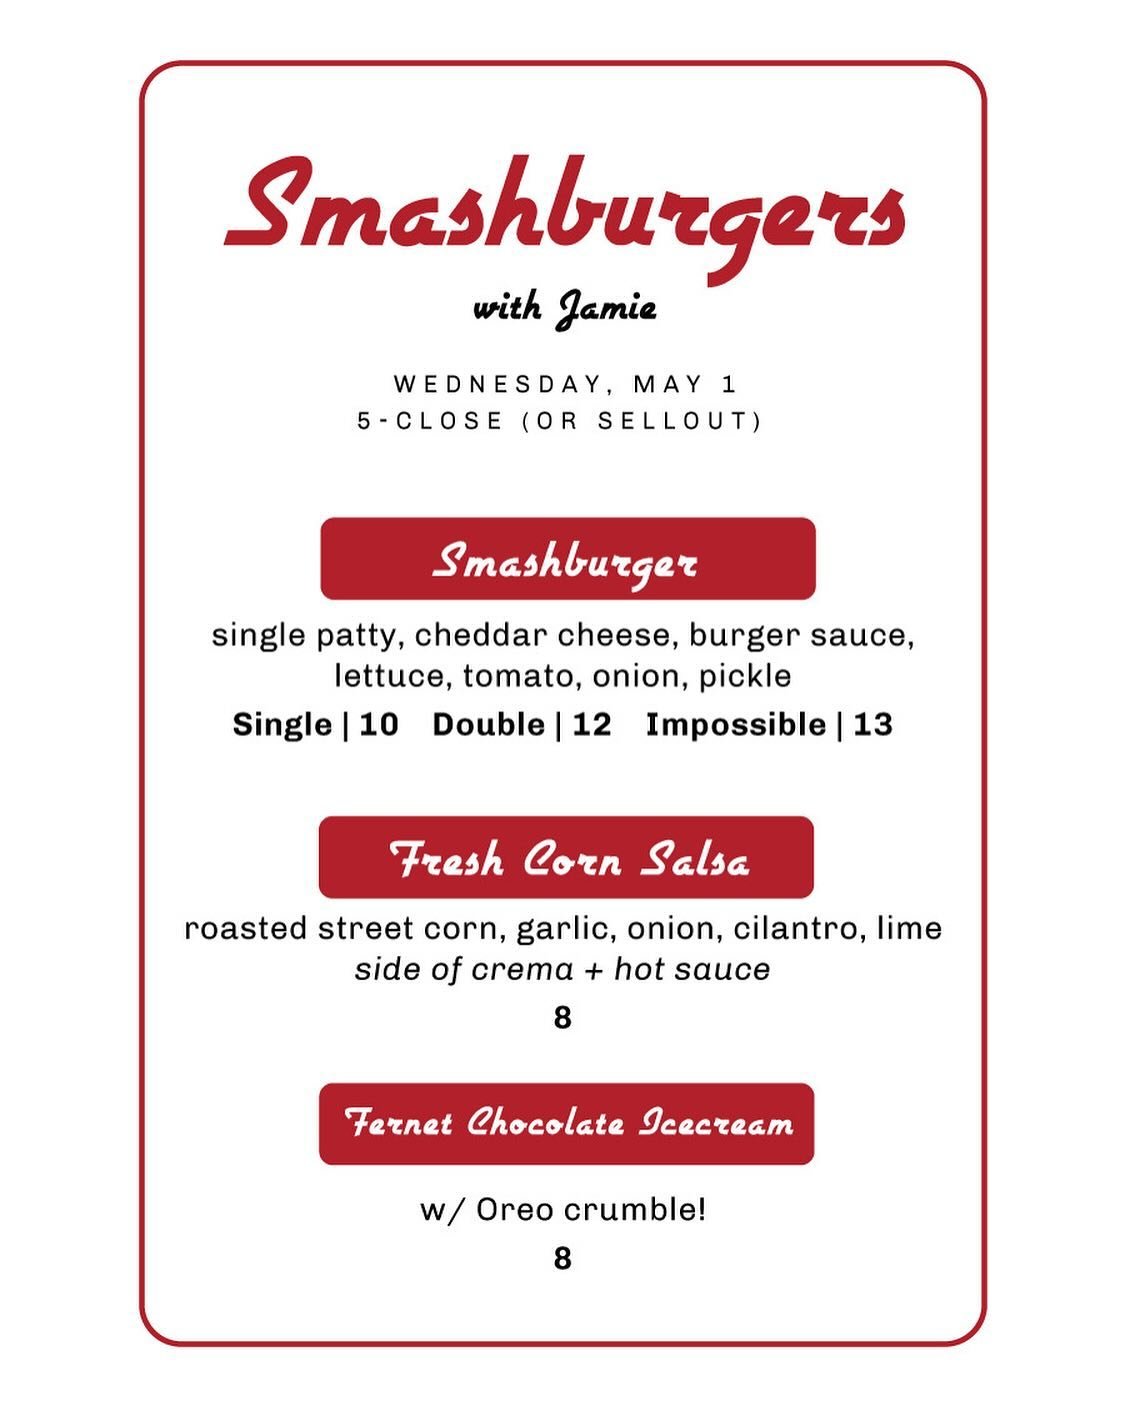 Our boy Jamie is cooking out on the grill tomorrow, Wednesday, May 1, 5-sellout! Smashburgers, $5 pull + pray beer cans, no regular menu, get crazy, get wild, let&rsquo;s party, get loud. ☀️☀️☀️